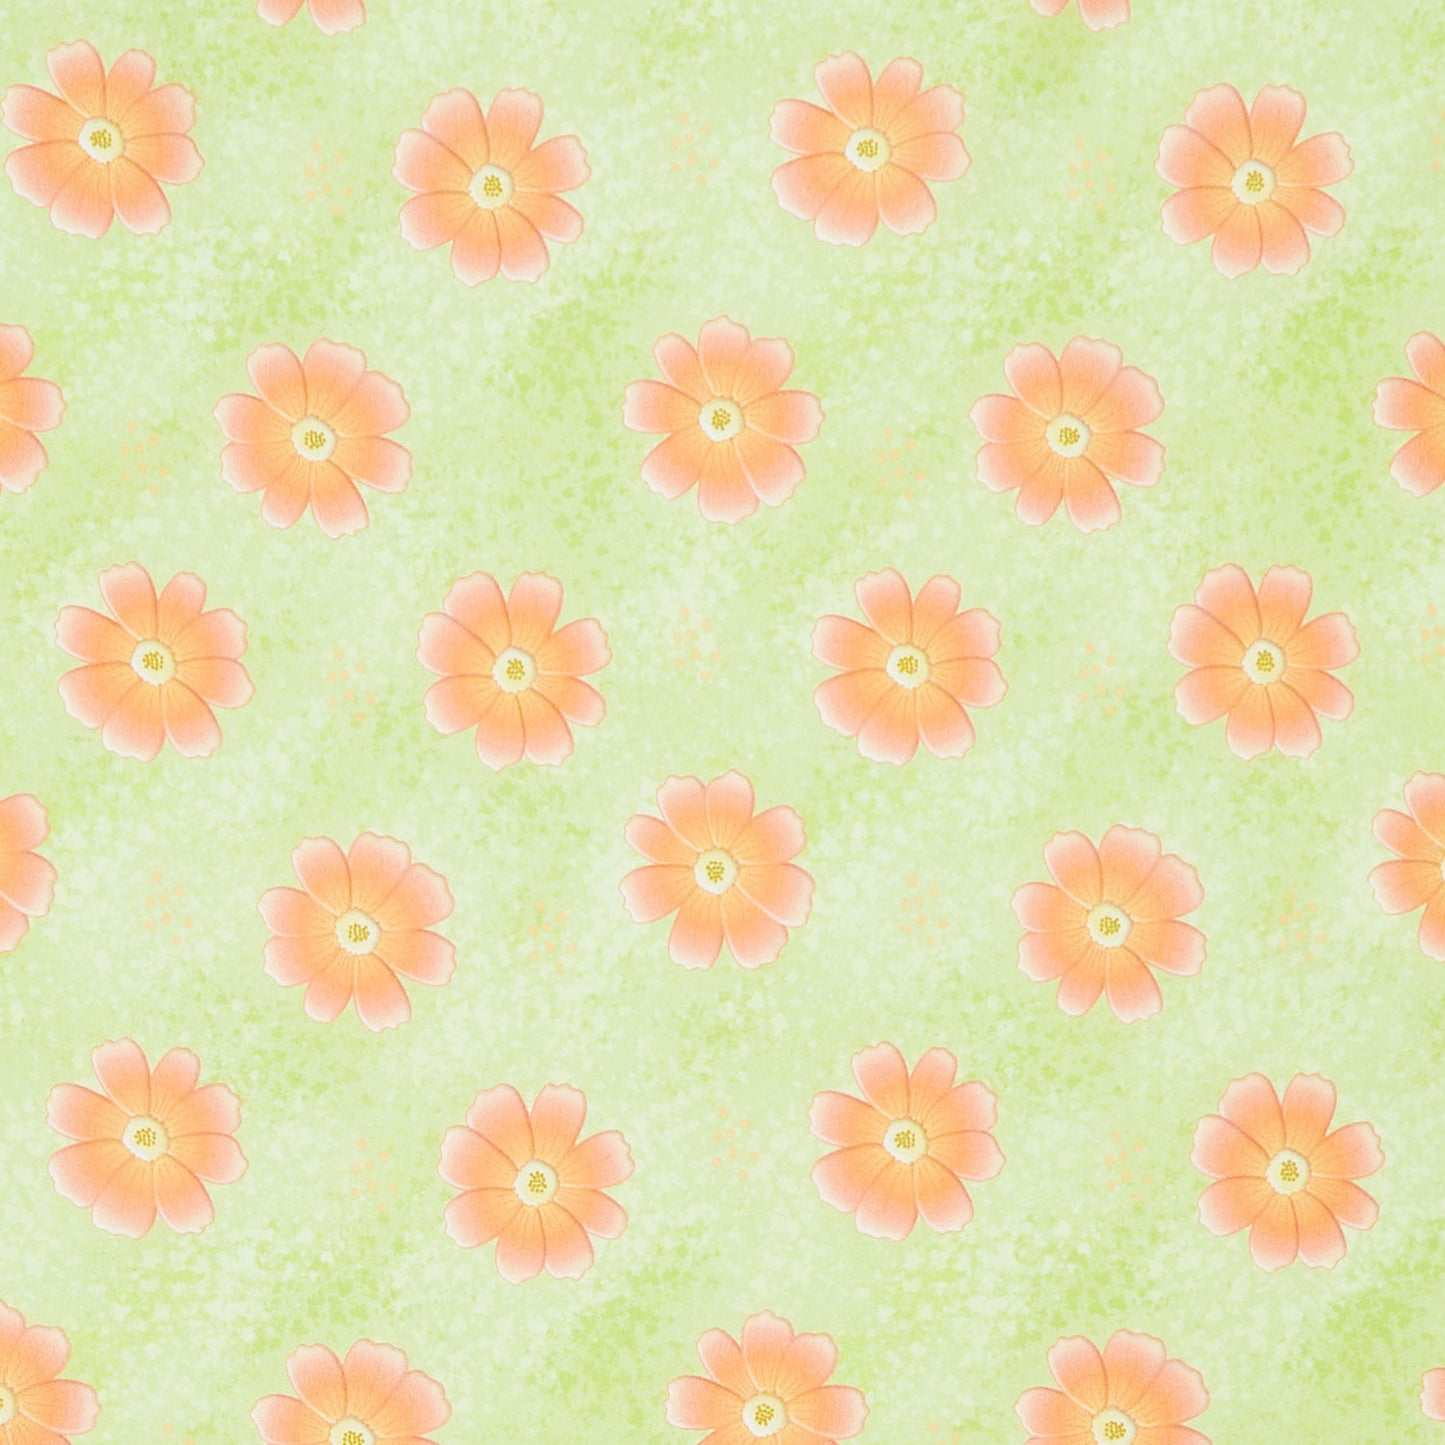 Blooming Medium Floral with Dots - Green Pistachio Yardage Primary Image